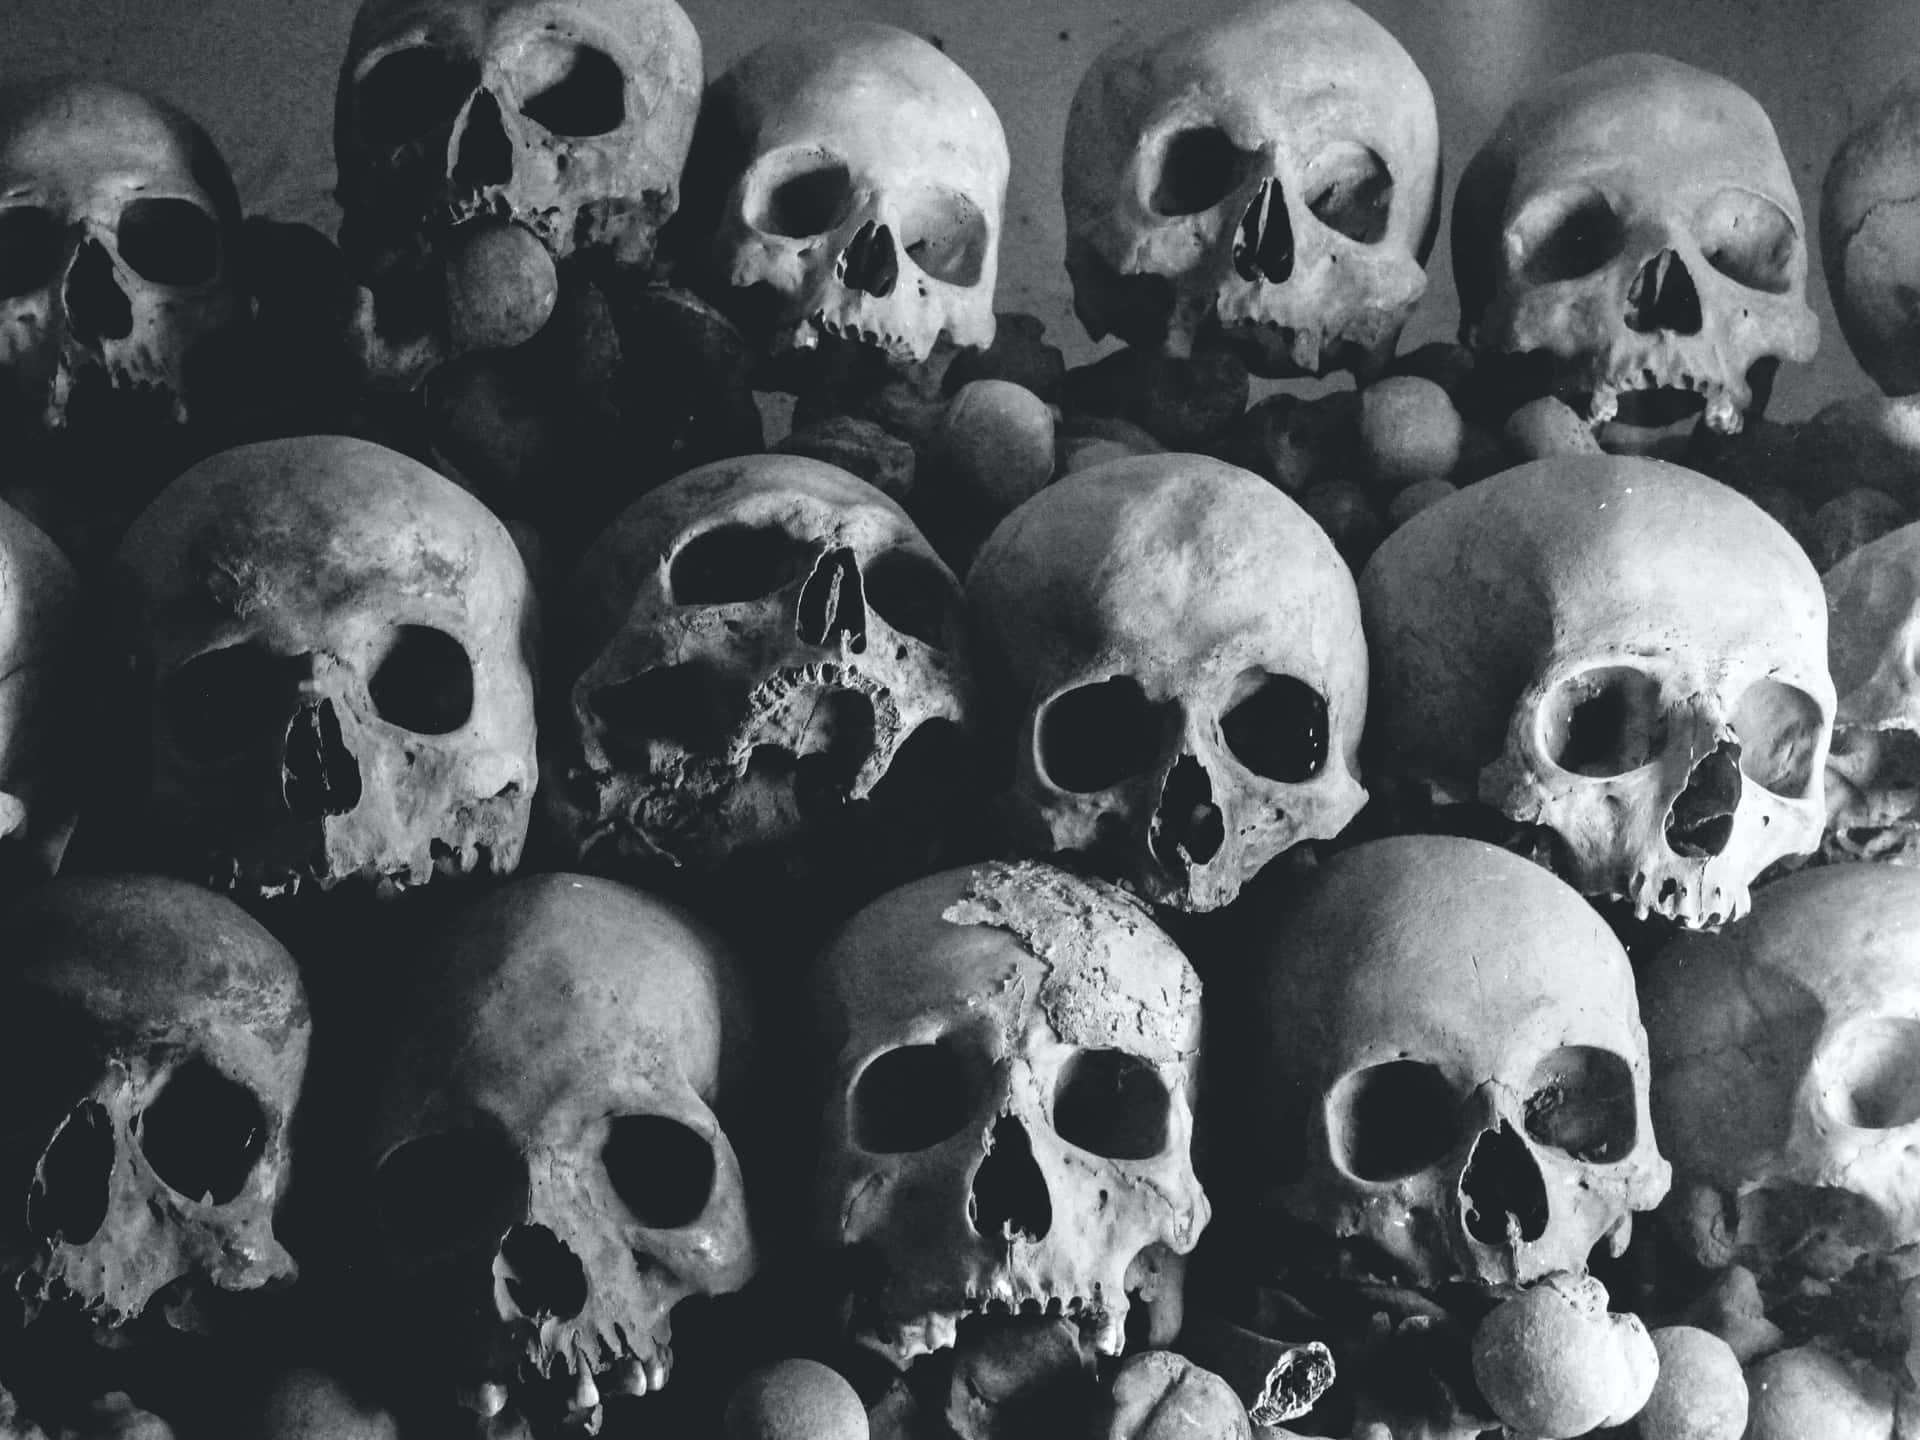 A Mysterious Assembly of Skulls